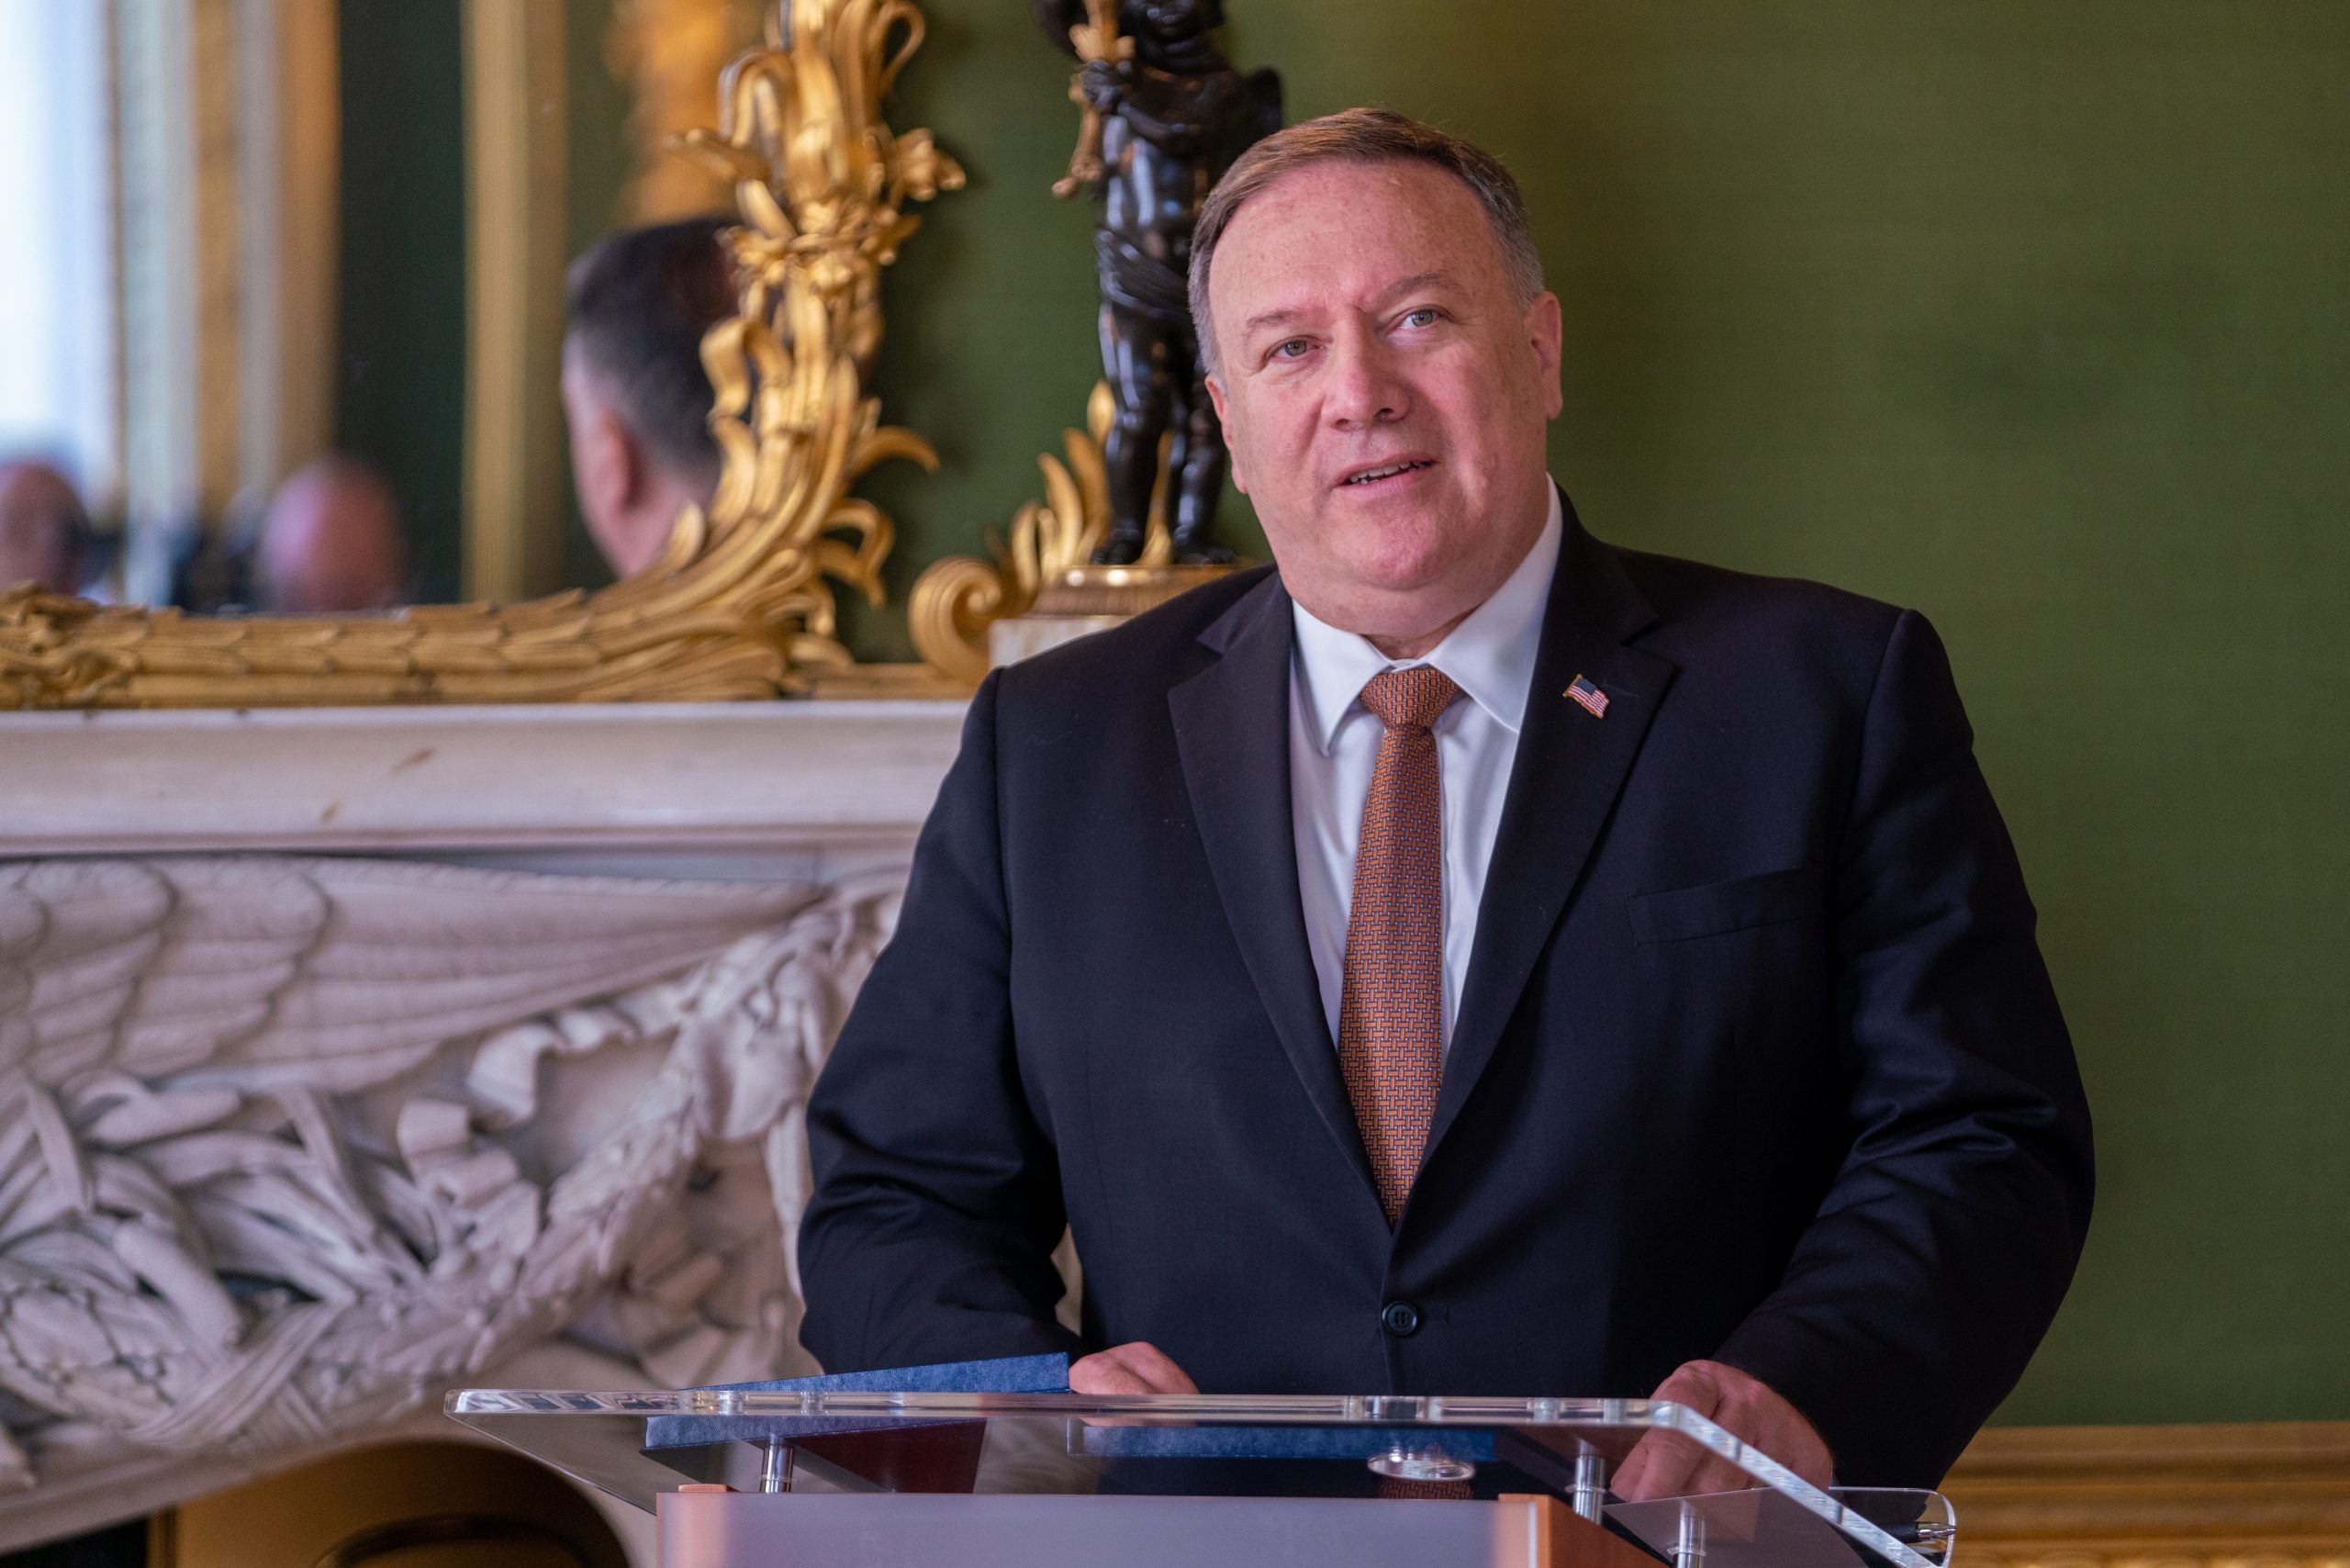 Pompeo to discuss Arctic and China in Denmark visit